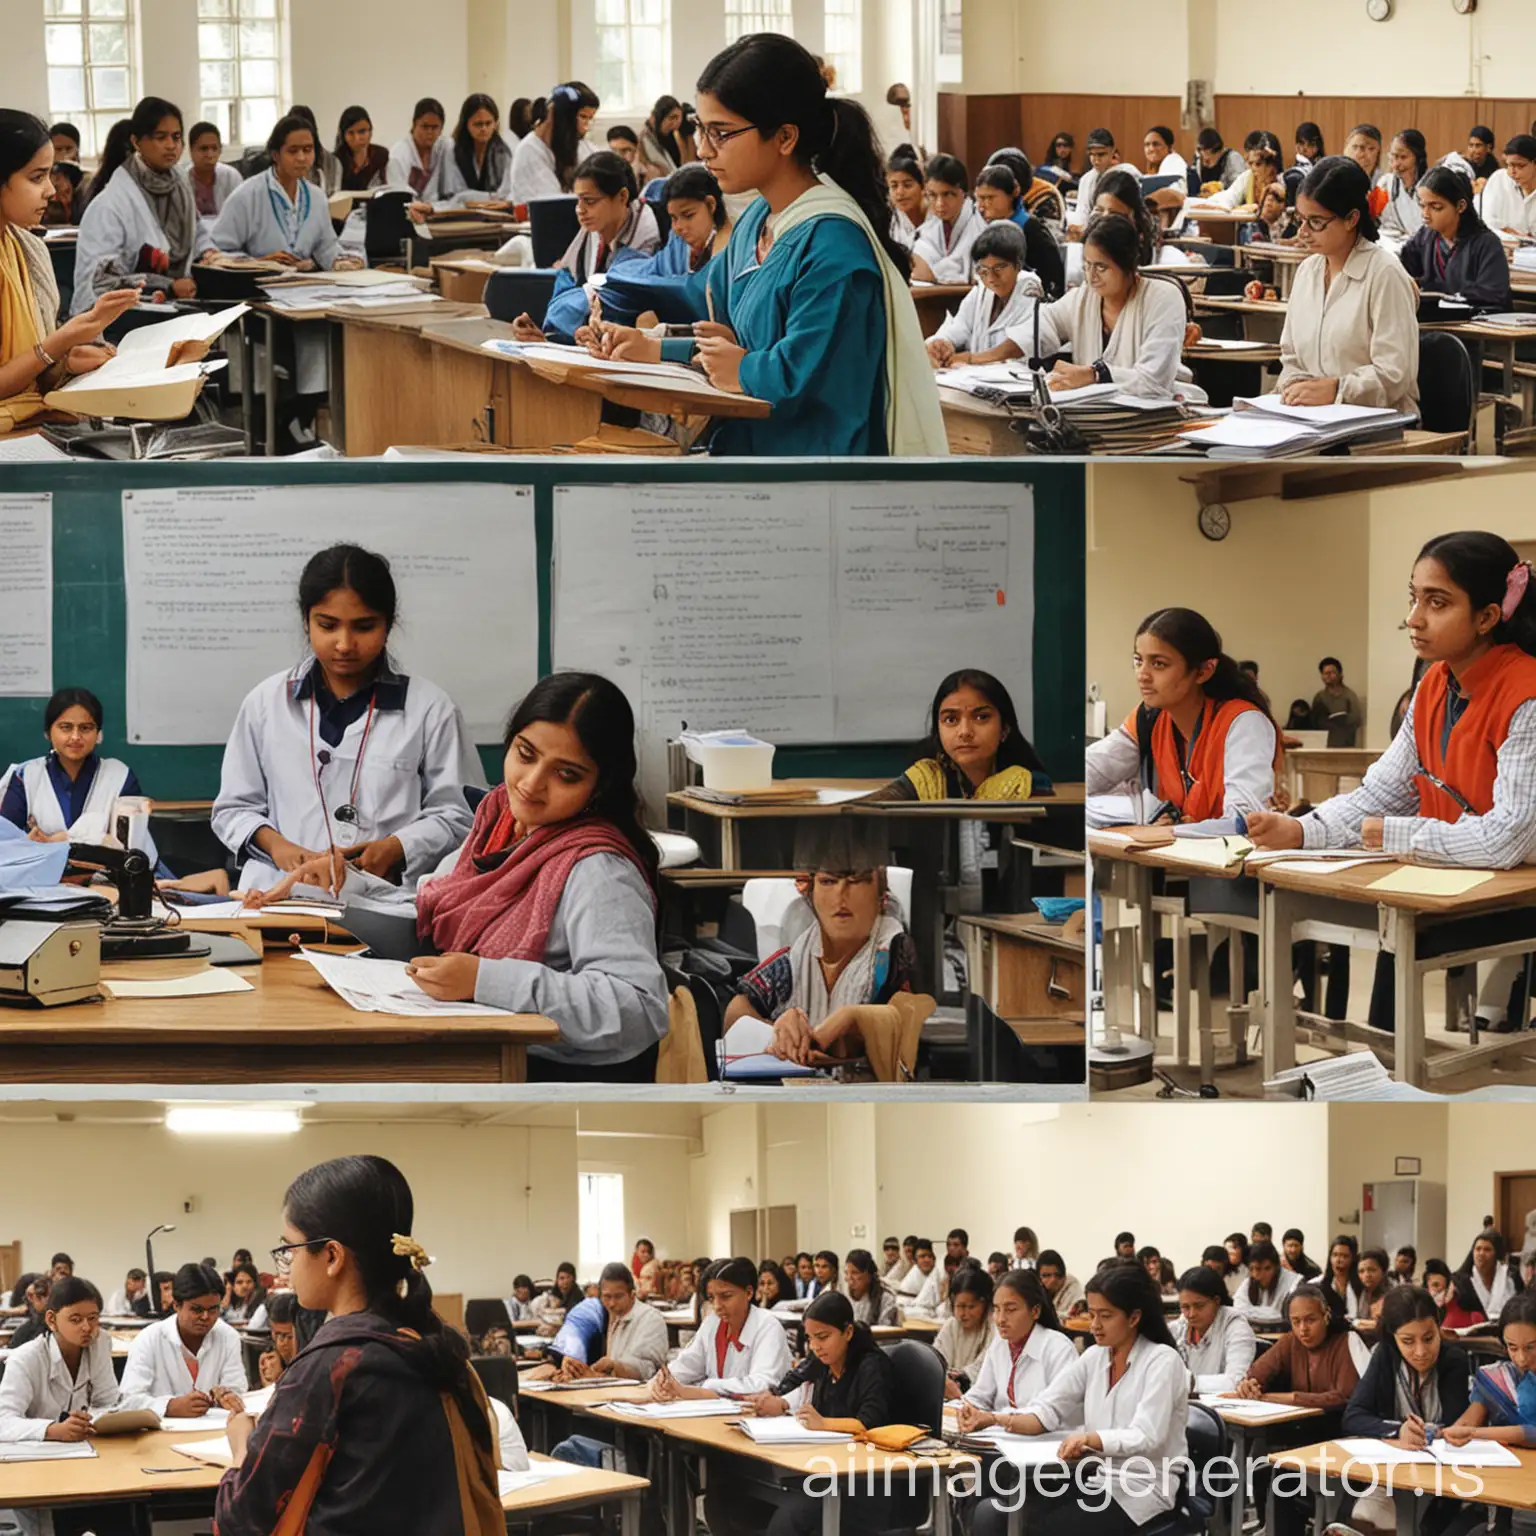 A collage depicting the positive impact of the scheme: a student attending a college lecture, another student working on a research project in a lab, and a graduate entering the workforce – all supported by the Gyan Jyoti Savitribai Phule Yojana.